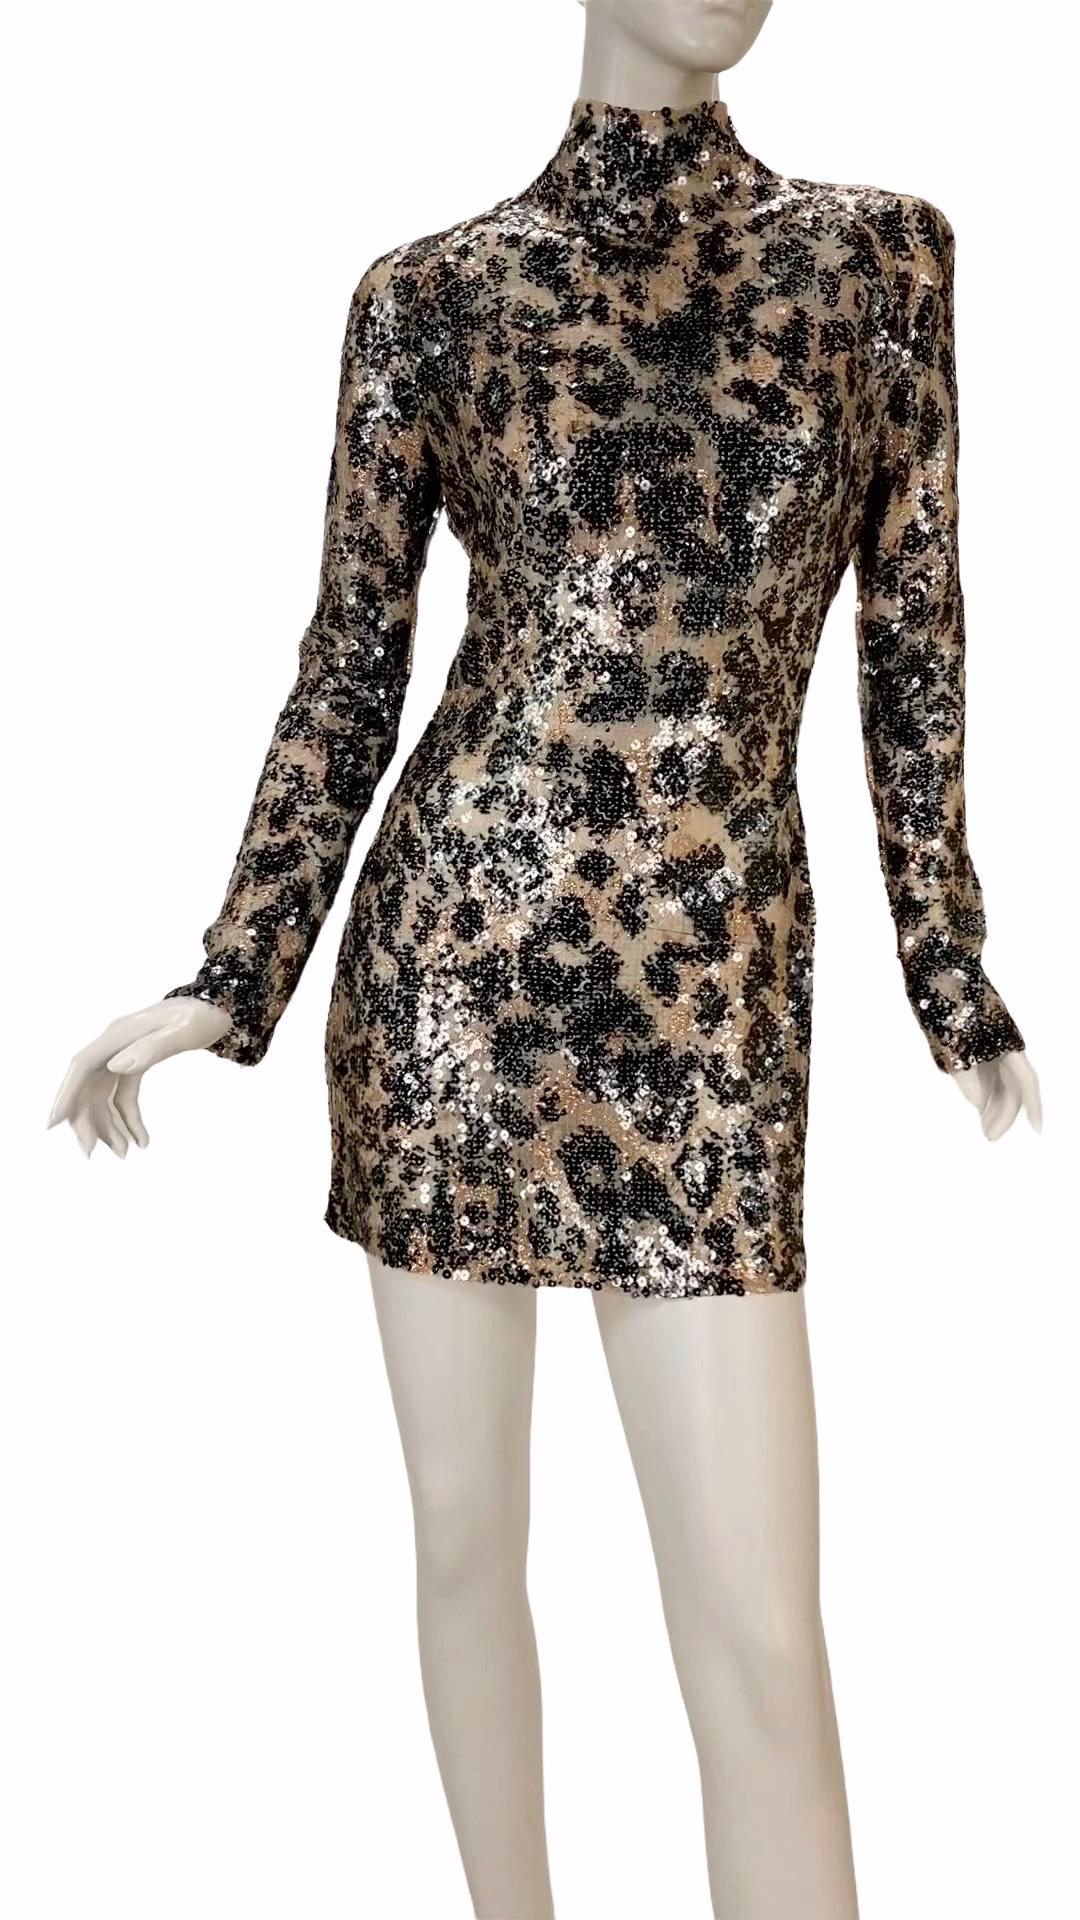 TOM FORD 

S/S 2011   

NUDE COLORED, LEOPARD PRINTED, HAND EMBROIDERED SEQUINED LACE

EVENING MINI DRESS

IT Size 40 - US 4

The dress that has it all - sex, style and class! 

Rare find from first Tom Ford own brand collection.

New, without